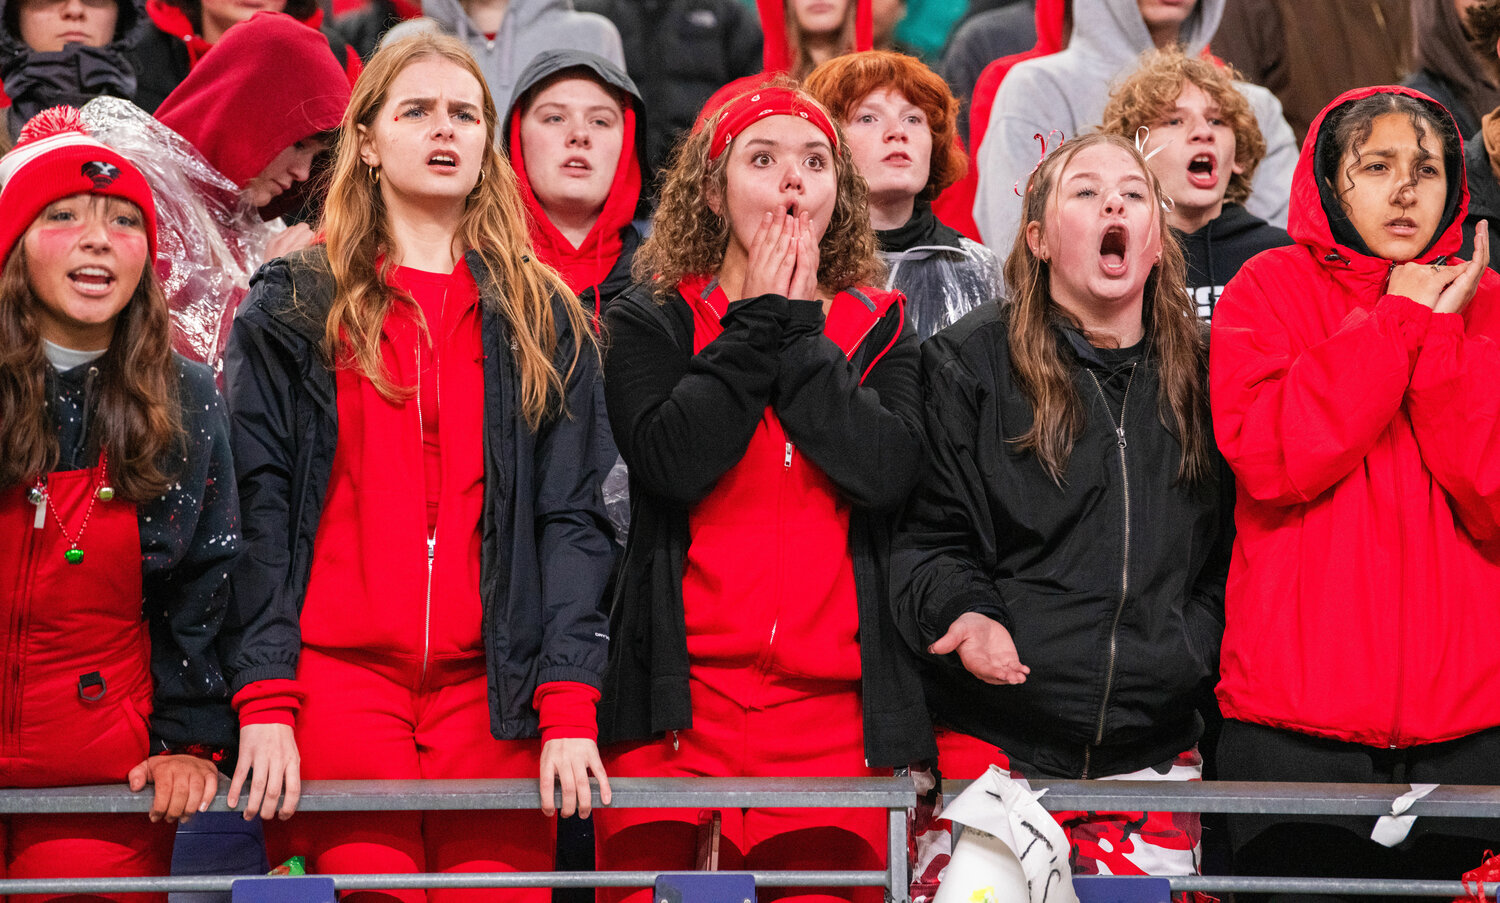 Tornado fans react while watching the 3A state football championship game between Yelm and Bellevue on Friday, Dec. 1, at Husky Stadium in Seattle.